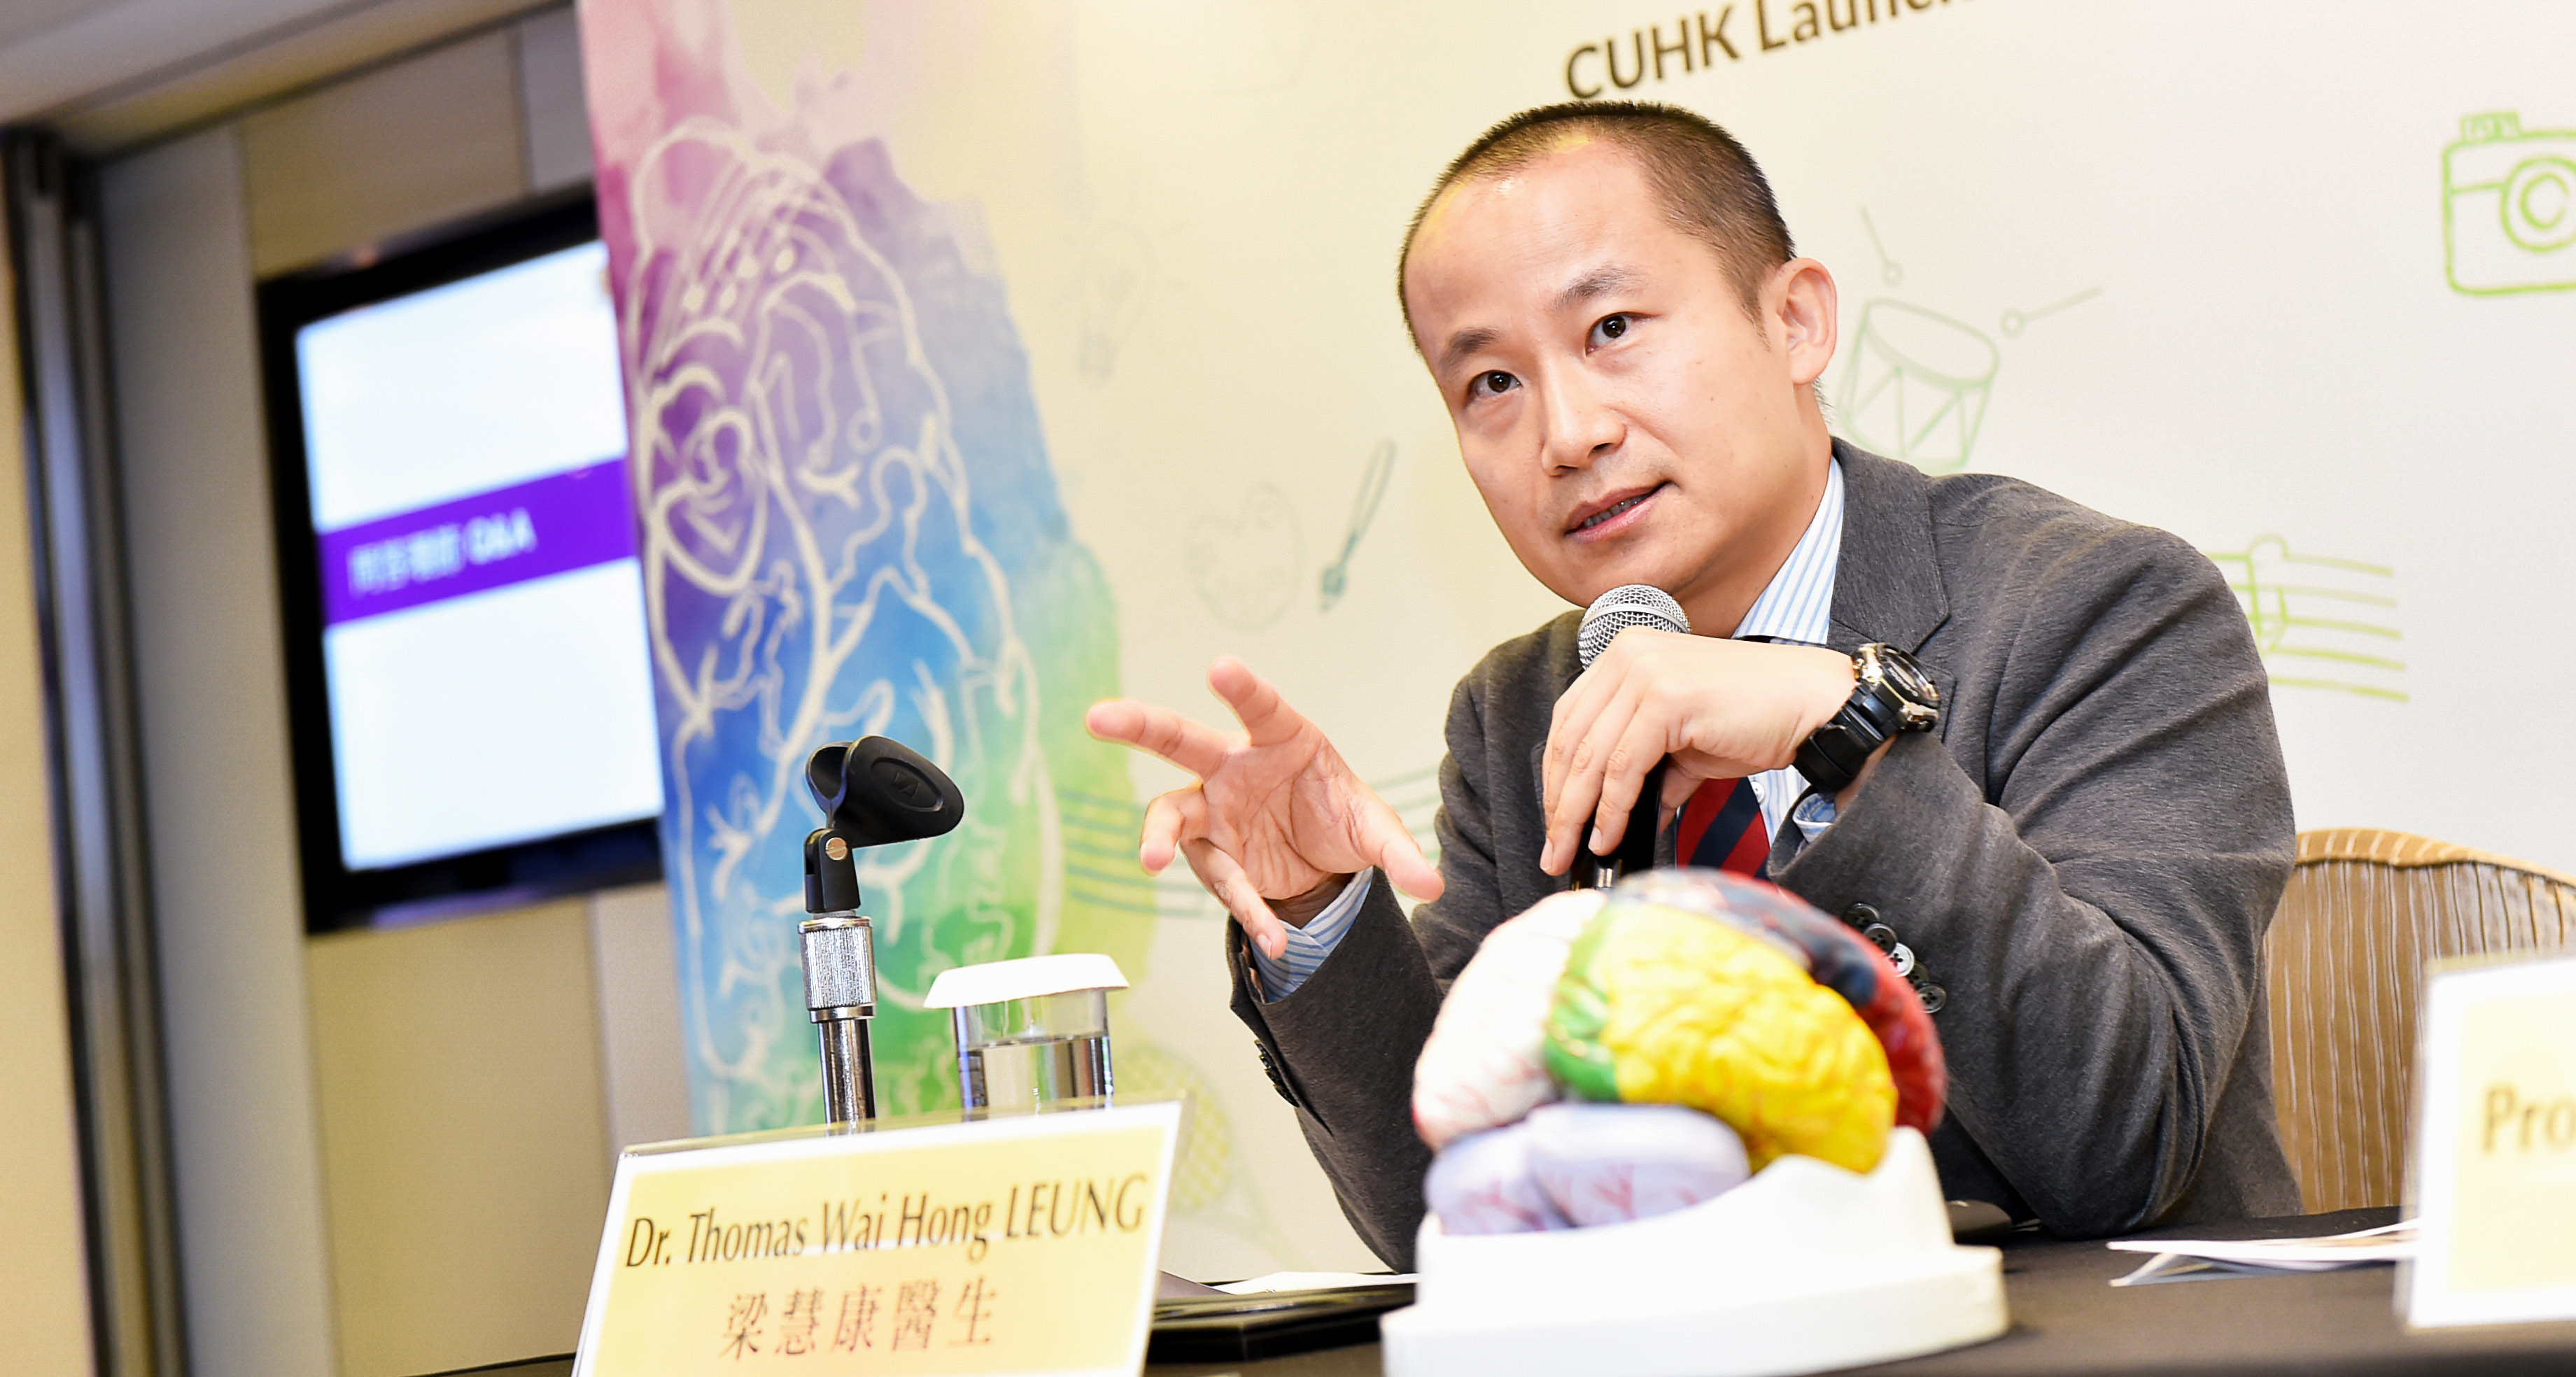 Dr. Thomas LEUNG states that through the Programme, the research team will dissect the intricate interaction between genetic, physical and social factors of neurological diseases, and provide a basis for formulating future healthcare policies.